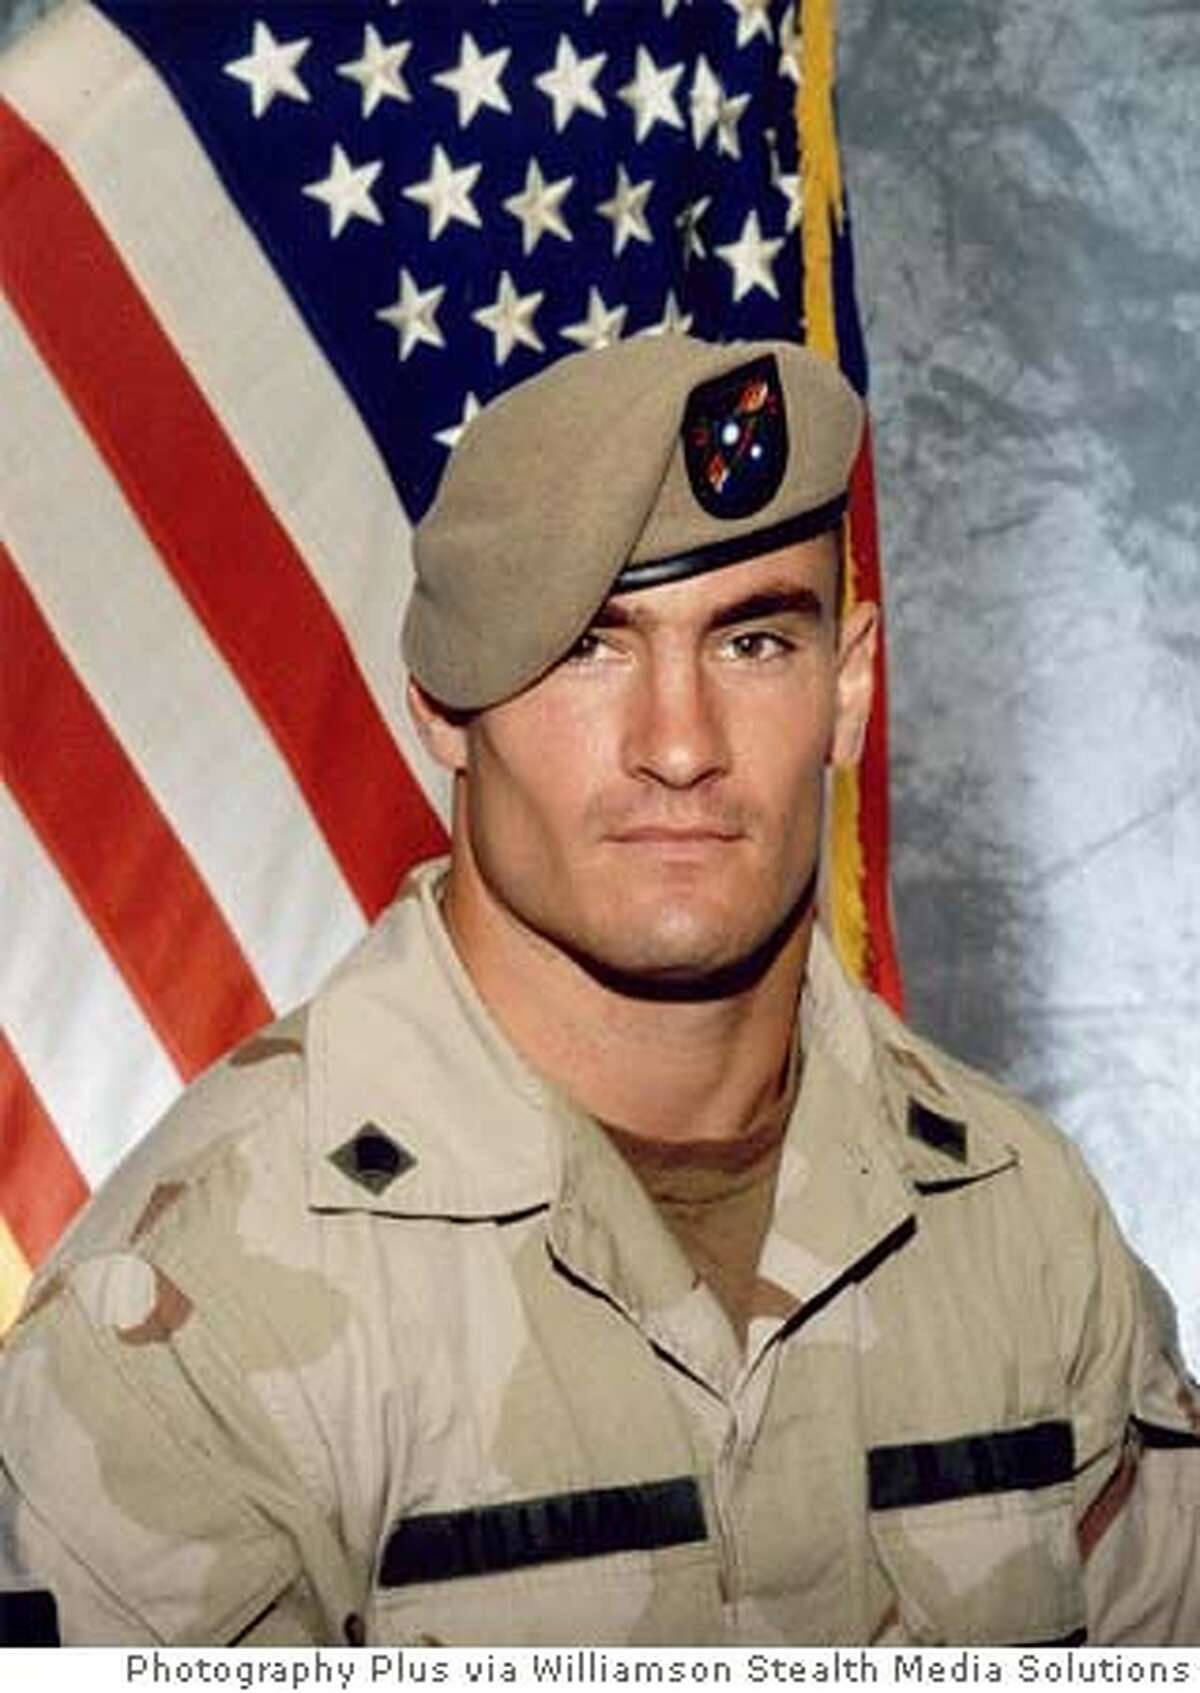 ** FILE ** Former Arizona Cardinals football player Pat Tillman, is shown in a June 2003 photo, released by Photography Plus. The New York Giants will face the Arizona Cardinals, Tillman's former team, when the NFL opens the 2005 season on Sept. 11, the first time pro football games have been played on that date since before the attacks. Tillman gave up a lucrative contract after the Sept. 11, 2001 terror attacks to join the Army with his brother, only to be killed in Afghanistan last year. (AP Photo/Photography Plus via Williamson Stealth Media Solutions) ** ADVANCE FOR WEEKEND EDITIONS, SEPT. 10-11** JUNE 2003 FILE PHOTO